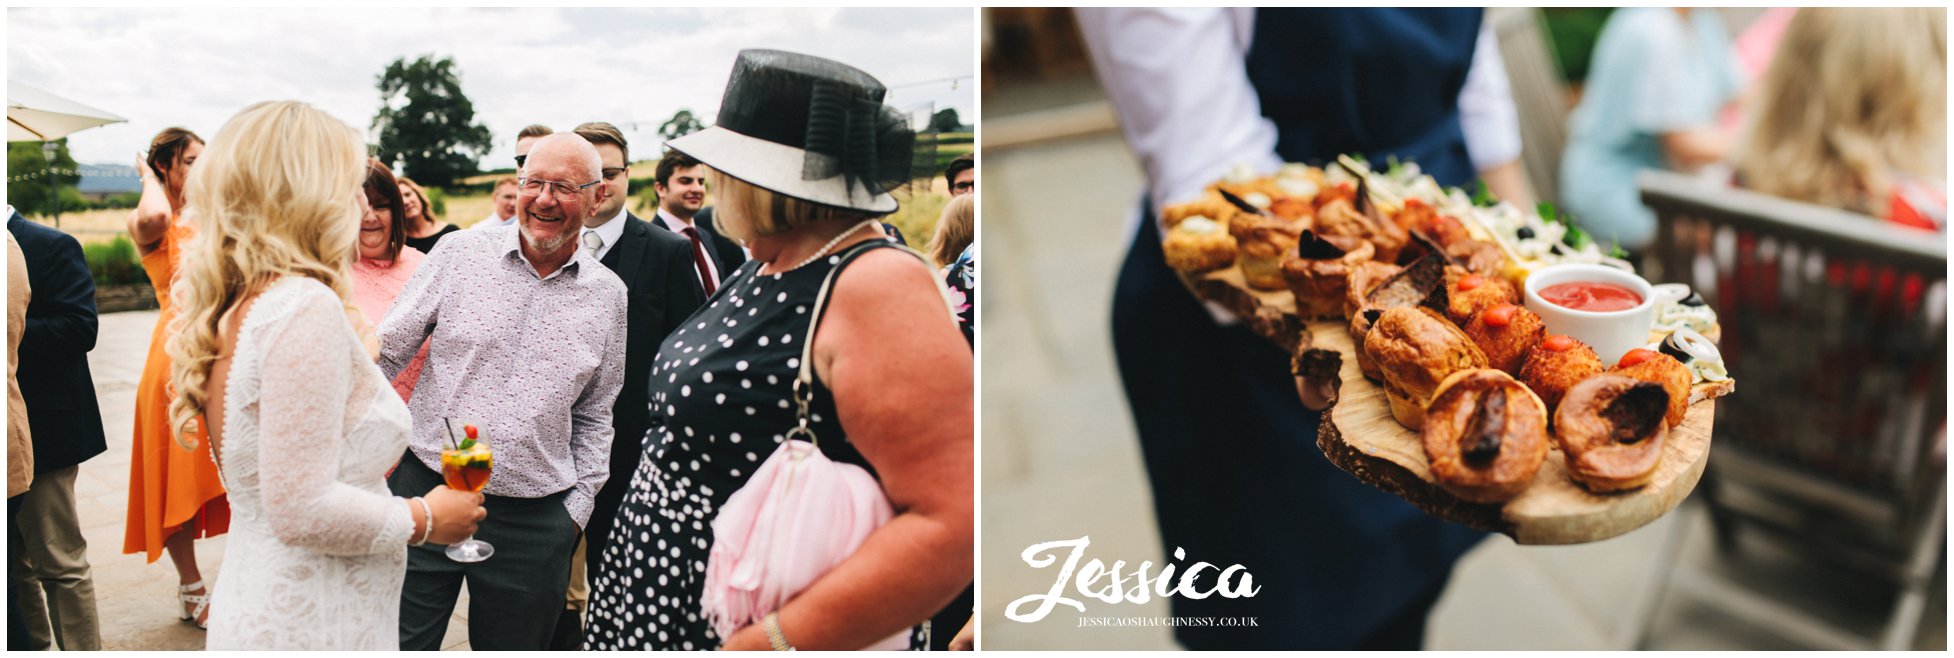 canapes are served at the north wales wedding ceremony